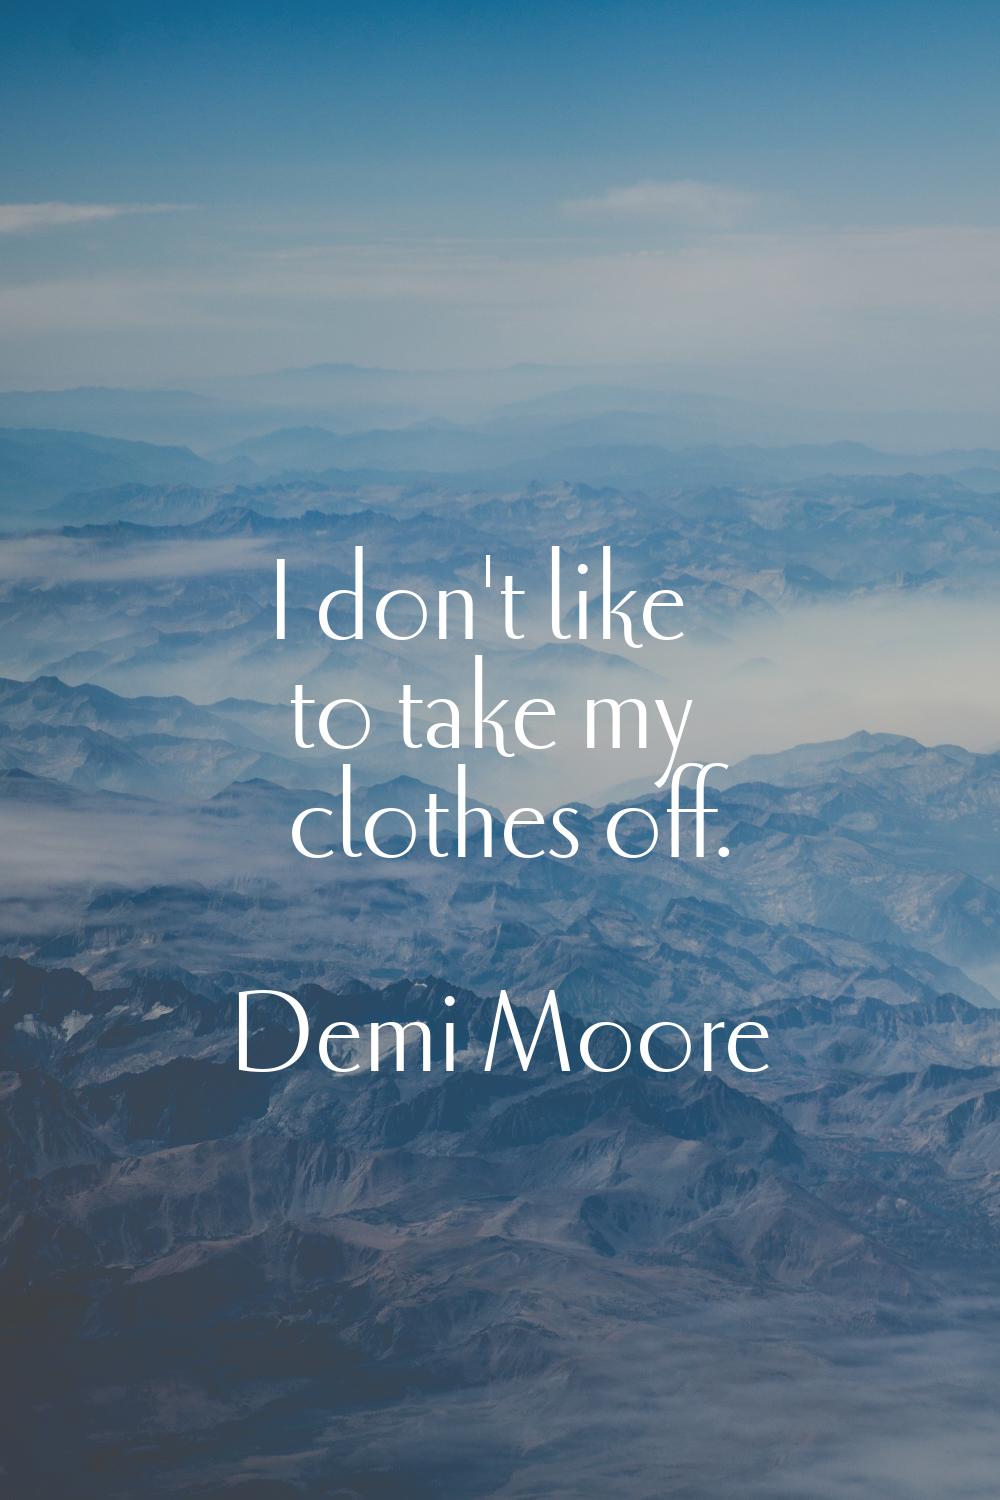 I don't like to take my clothes off.